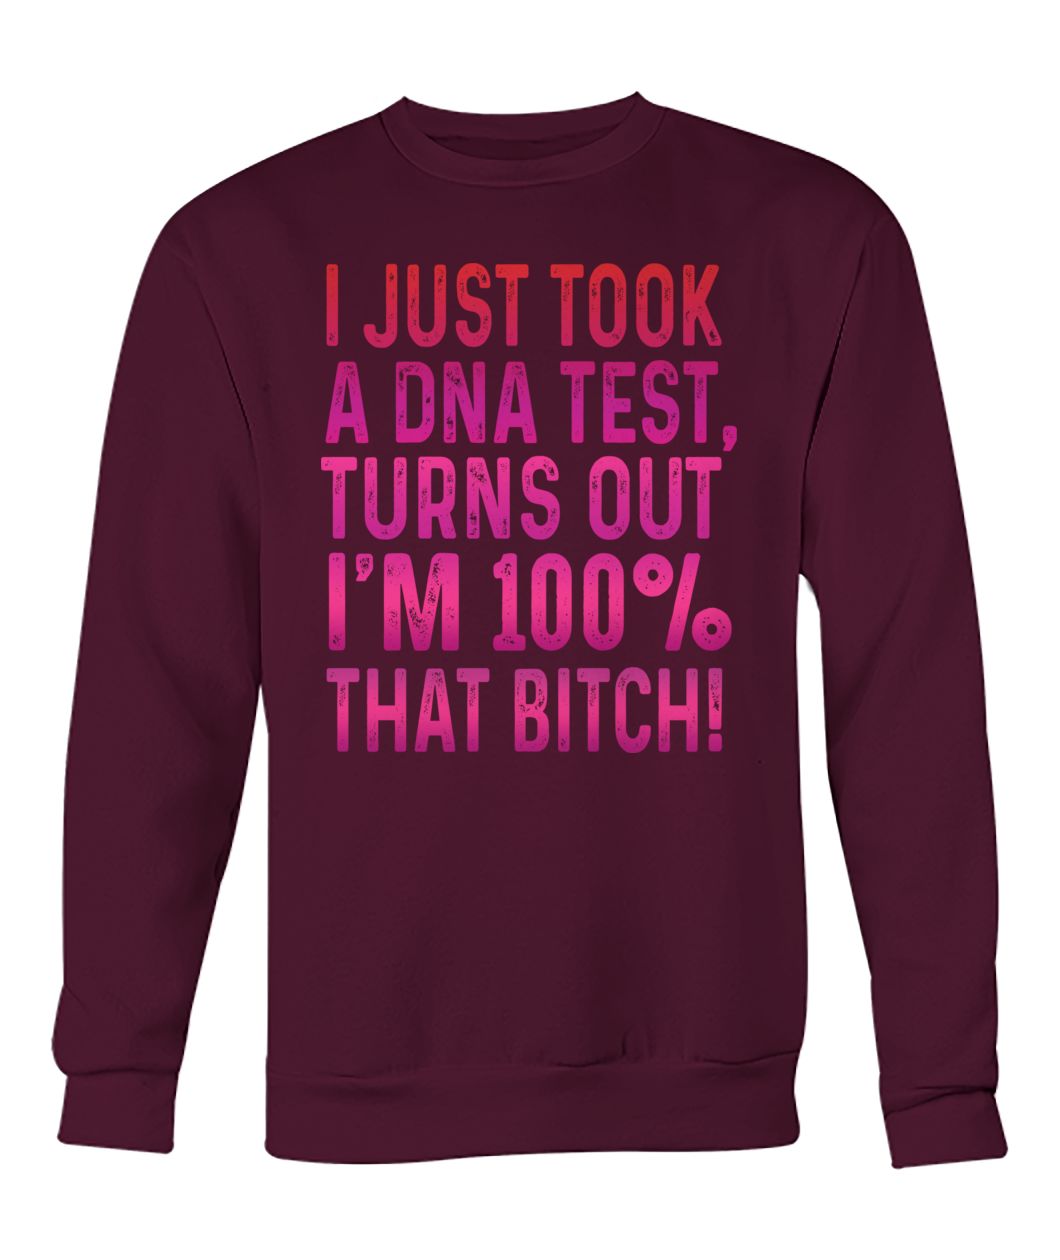 I just took a DNA test turns out I'm 100% that bitch crew neck sweatshirt